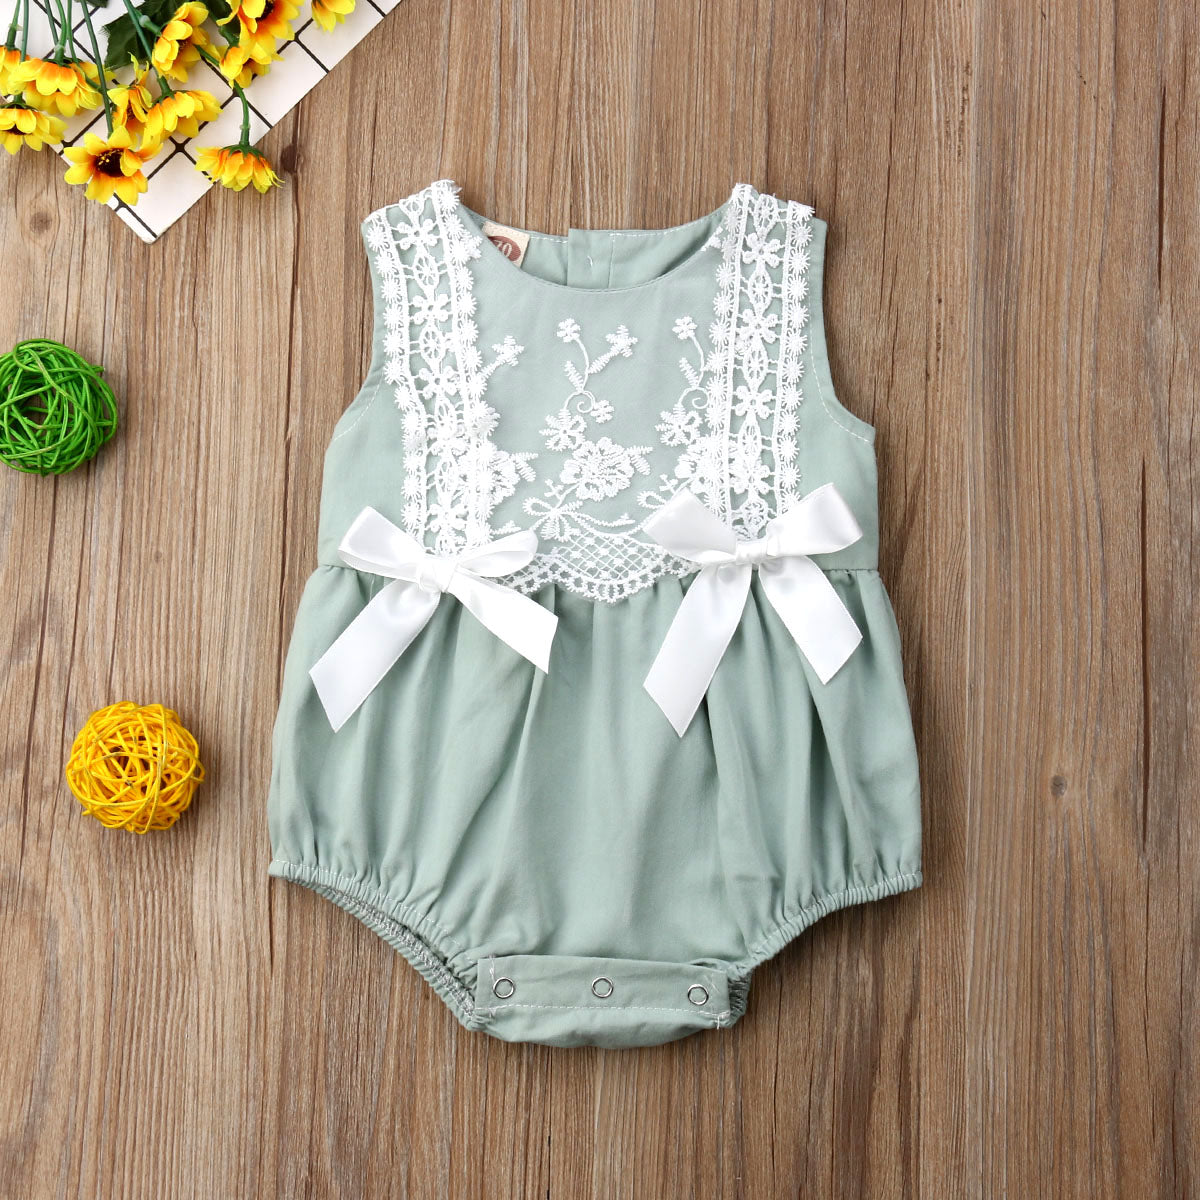 Summer Toddler Baby Girl Lace Flower Bodysuit Patchwork Cute Jumpsuit